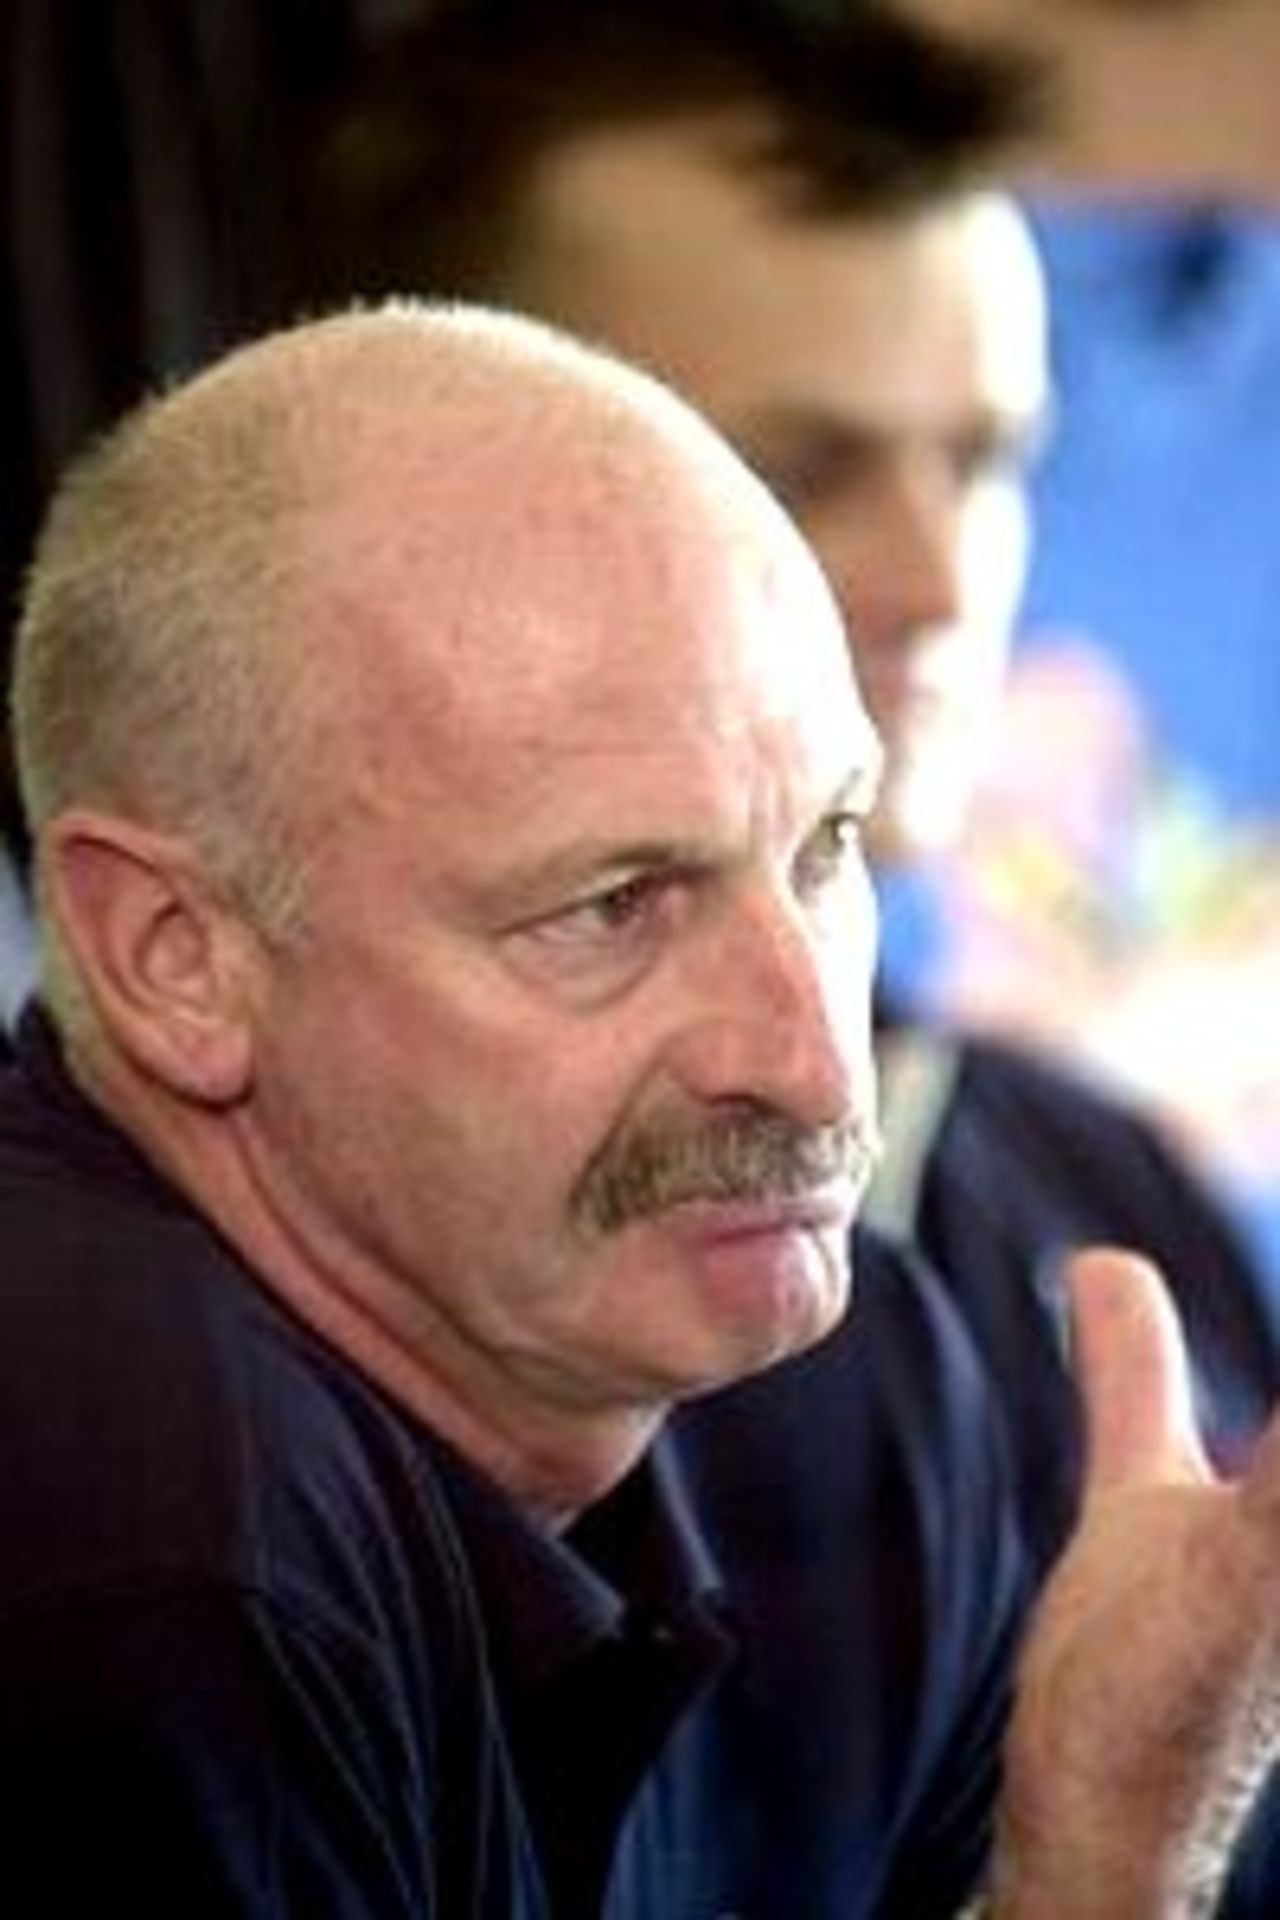 29 Nov 2000: Dennis Lillee at a media launch for his new sportswear to be launched in India next year at the WACA Ground in Perth, Western Australia on December 1.